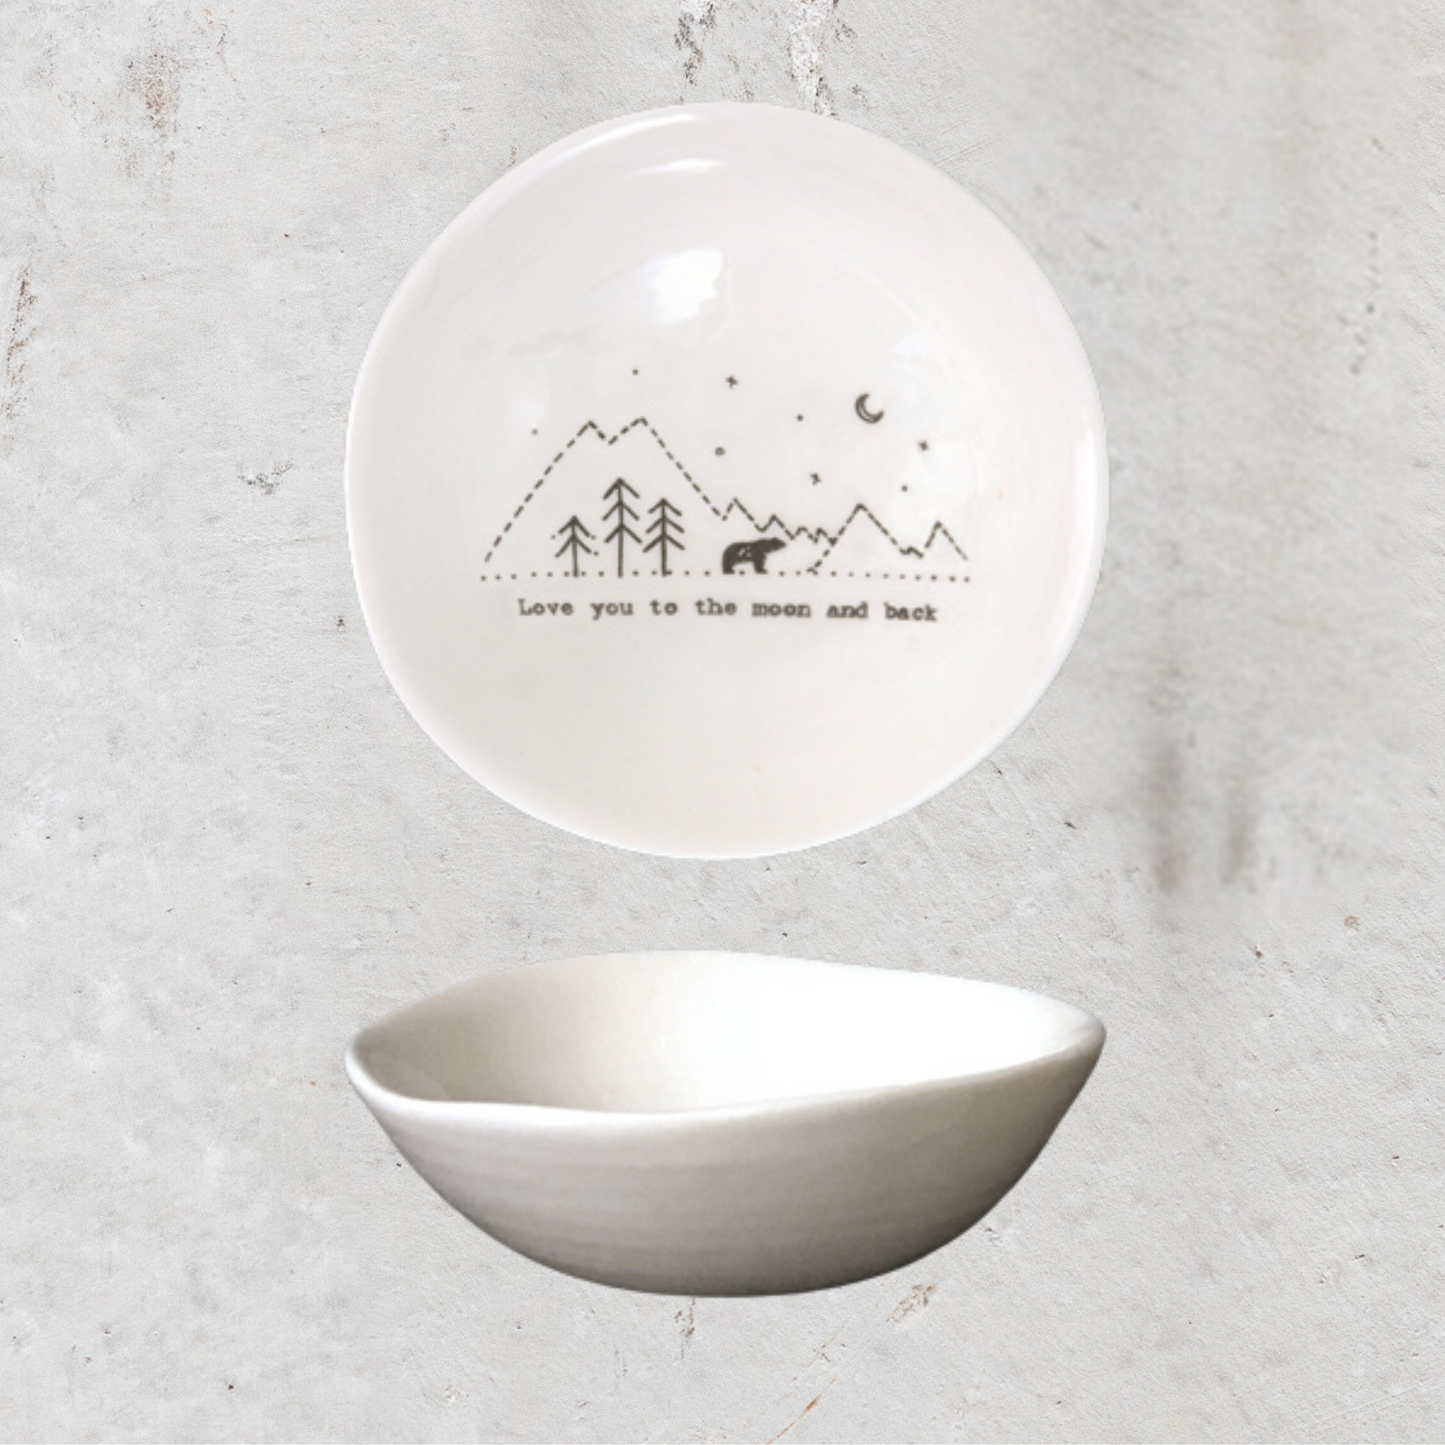 EI6025 med wobbly bowl love you to the moon